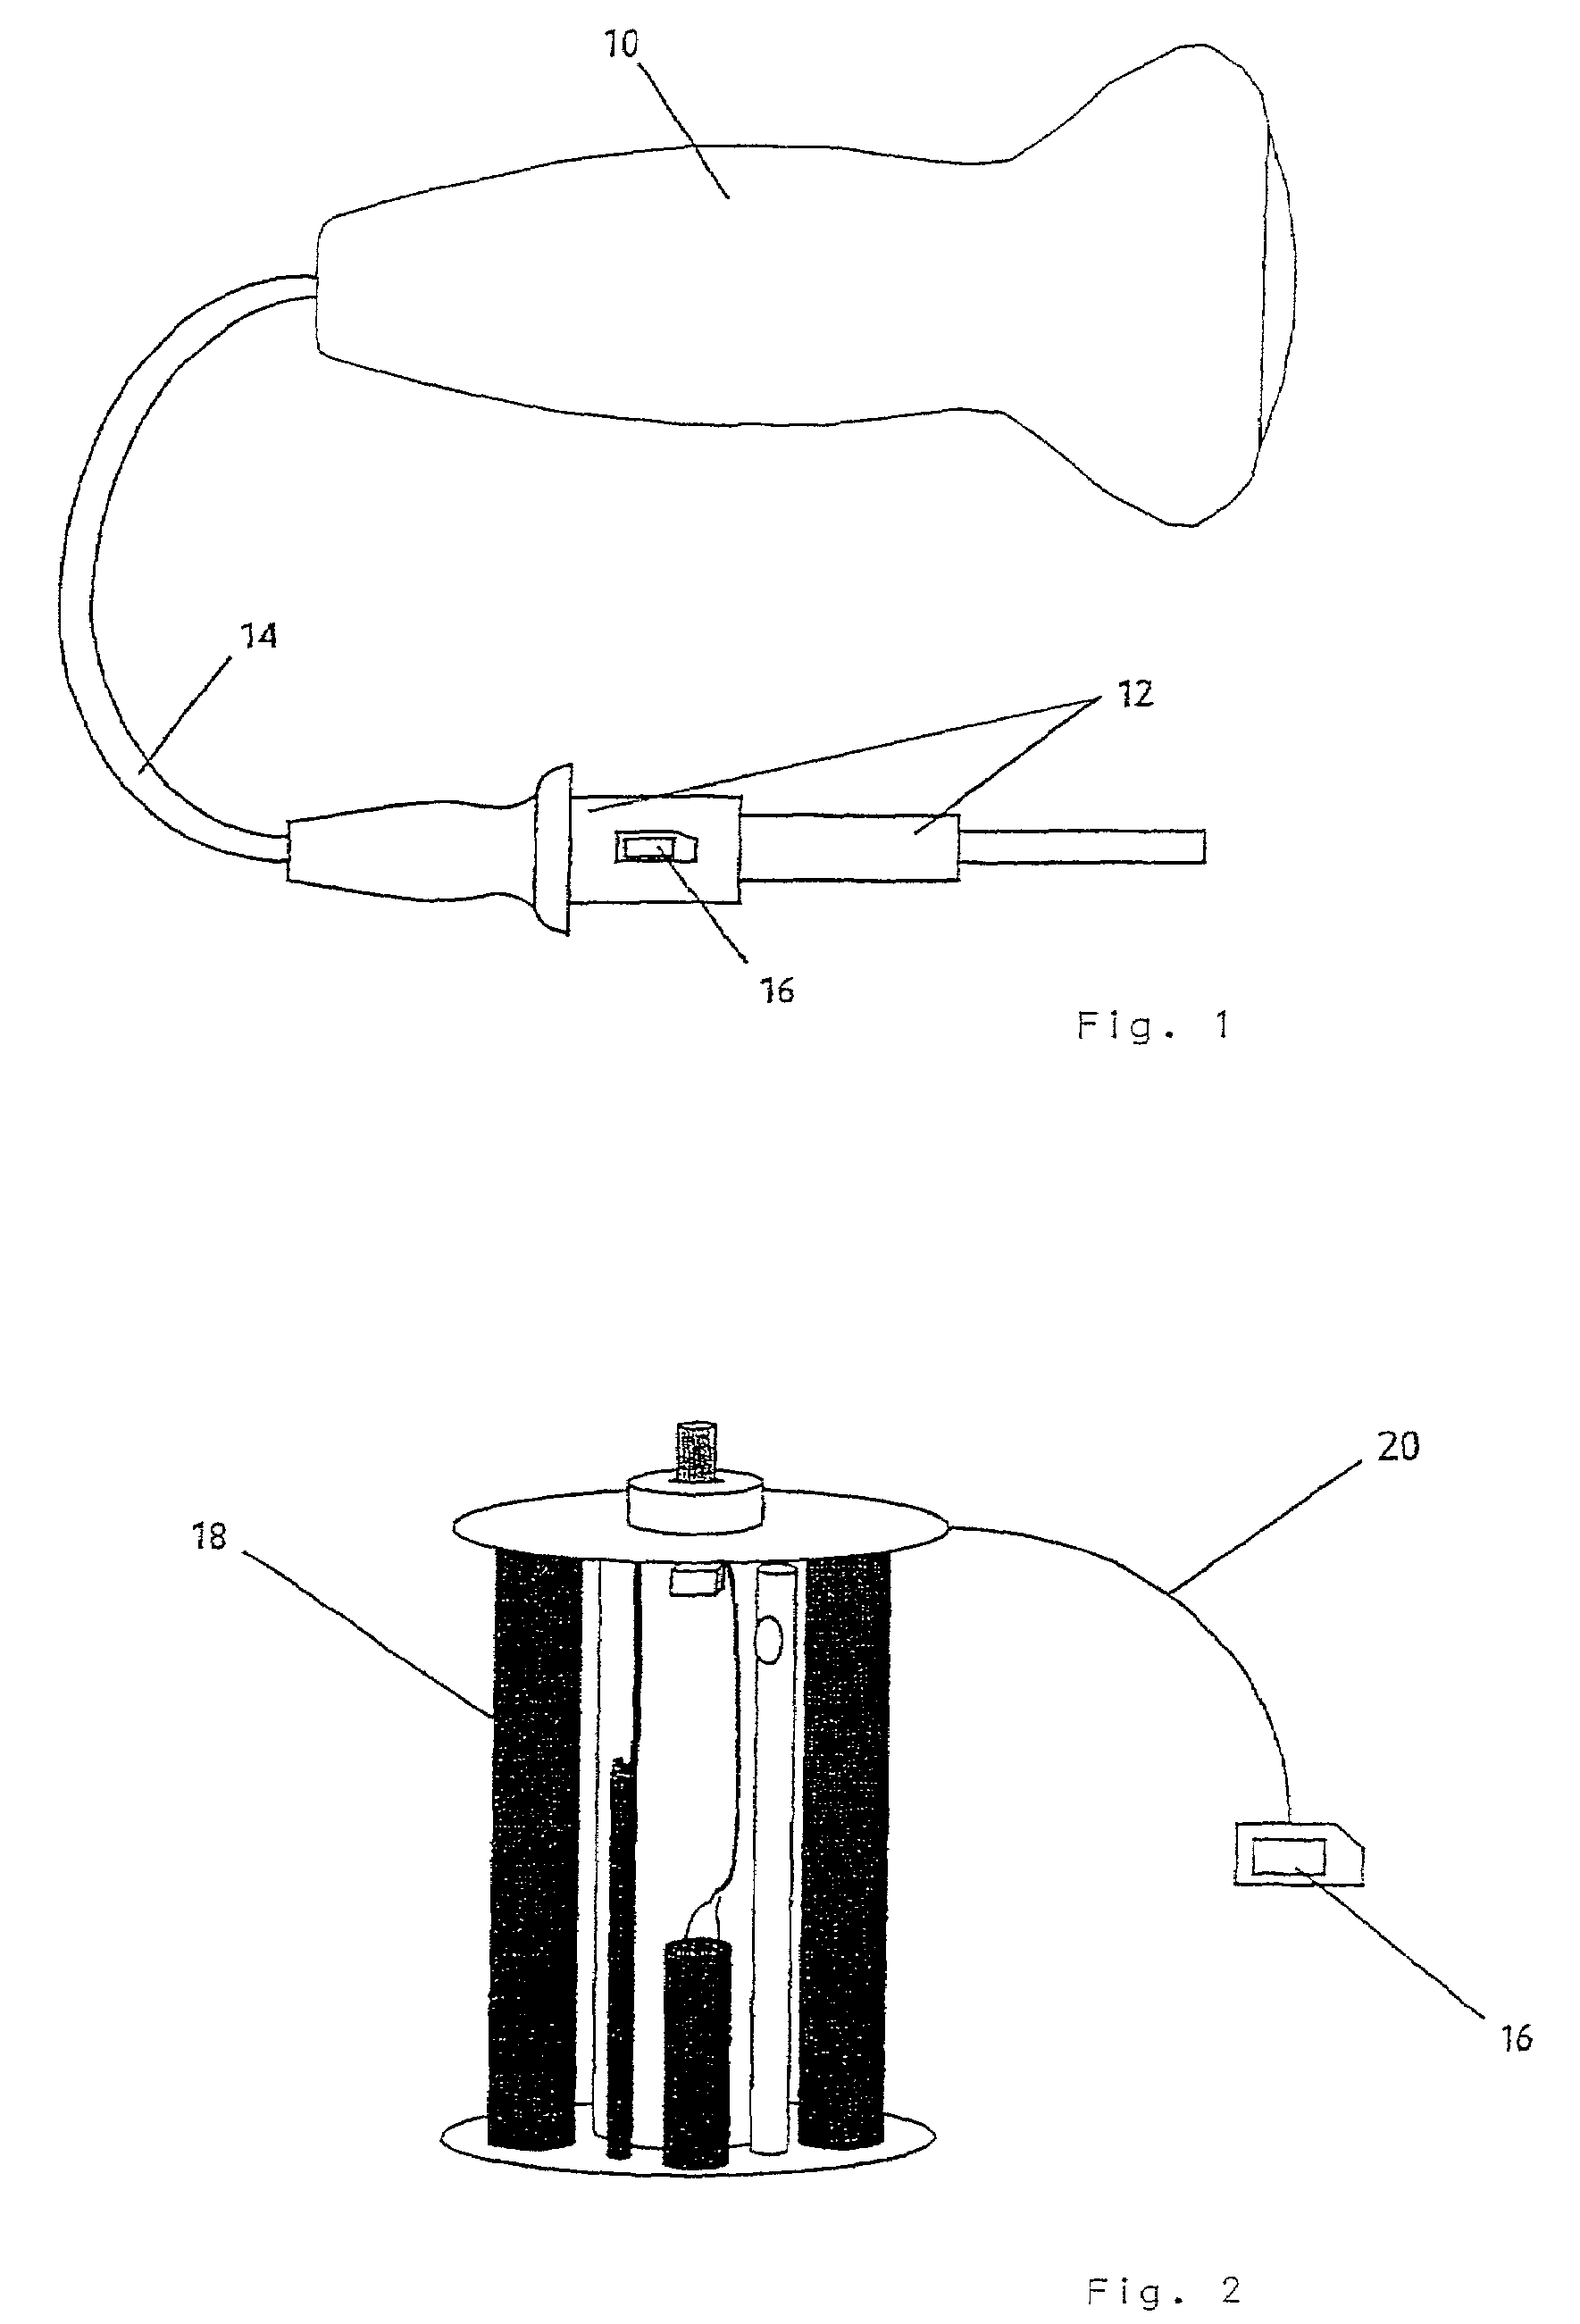 Apparatus for administering acoustic shock waves having a removable and replaceable component with a data storage medium